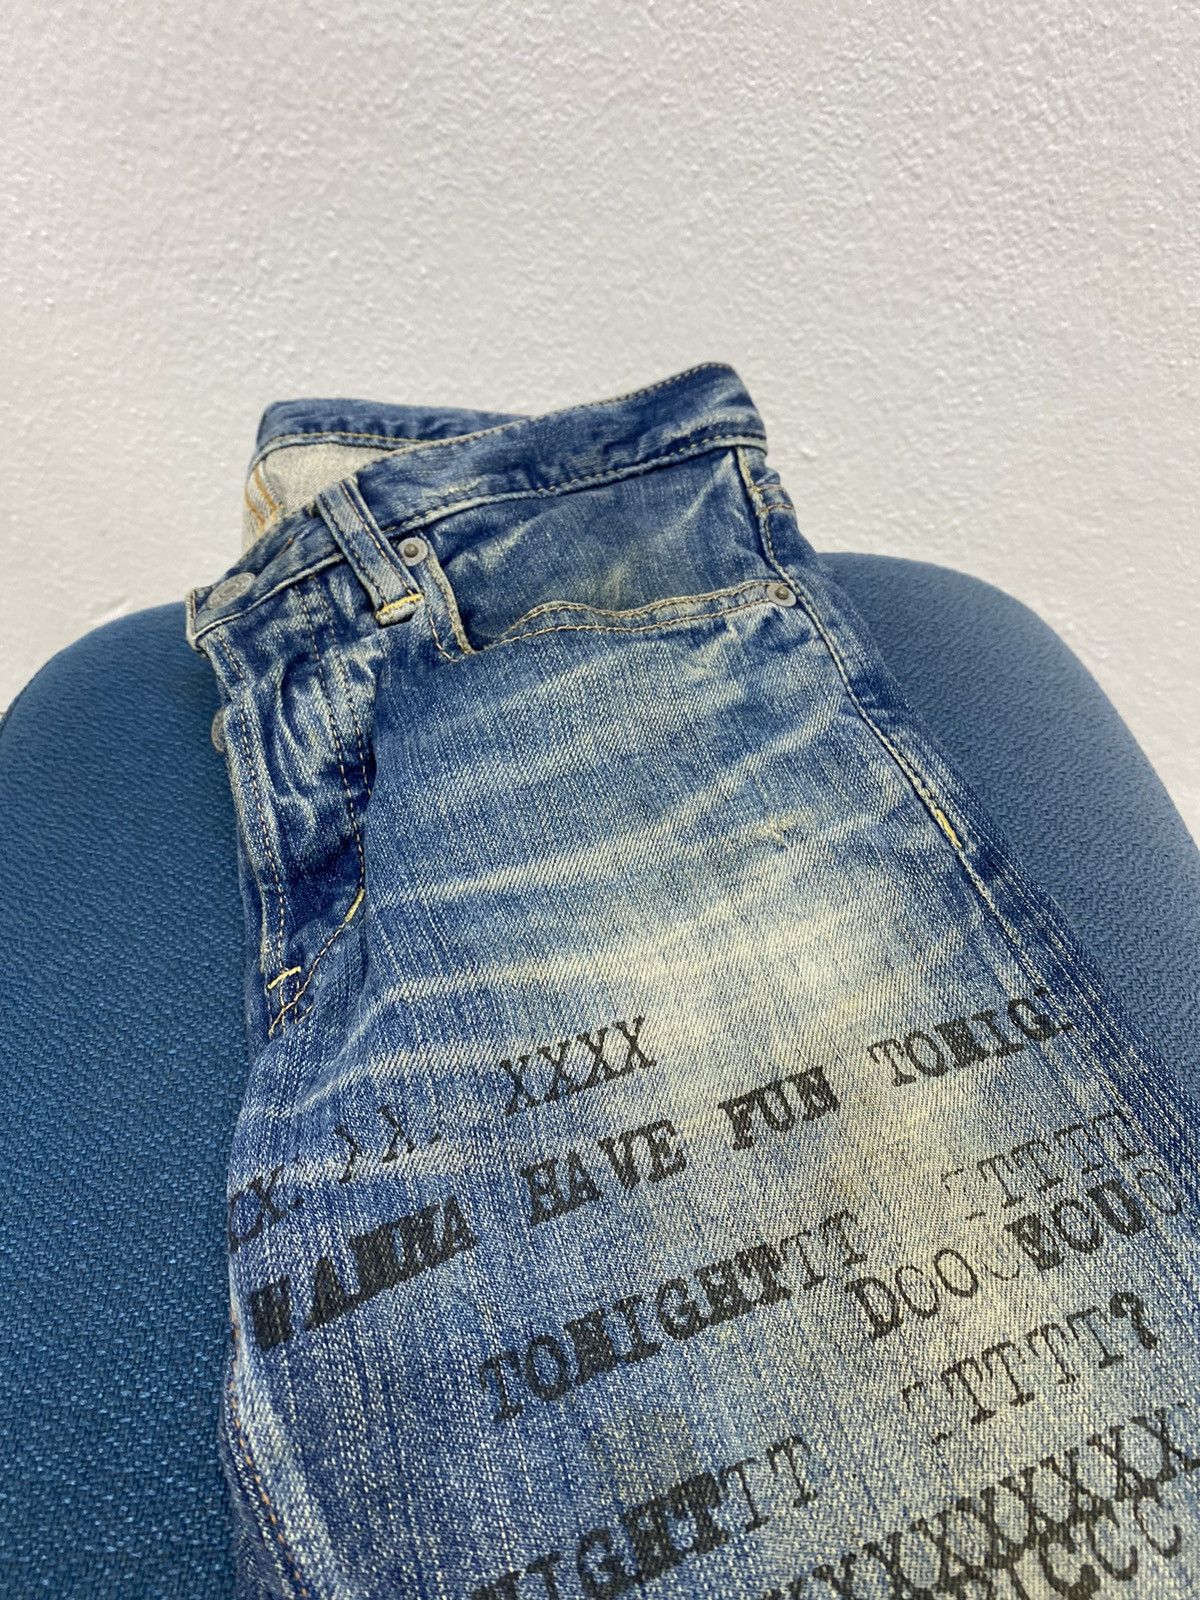 Hysteric Glamour "Do You Wanna Have Fun Tonight” Denim Jeans - 7